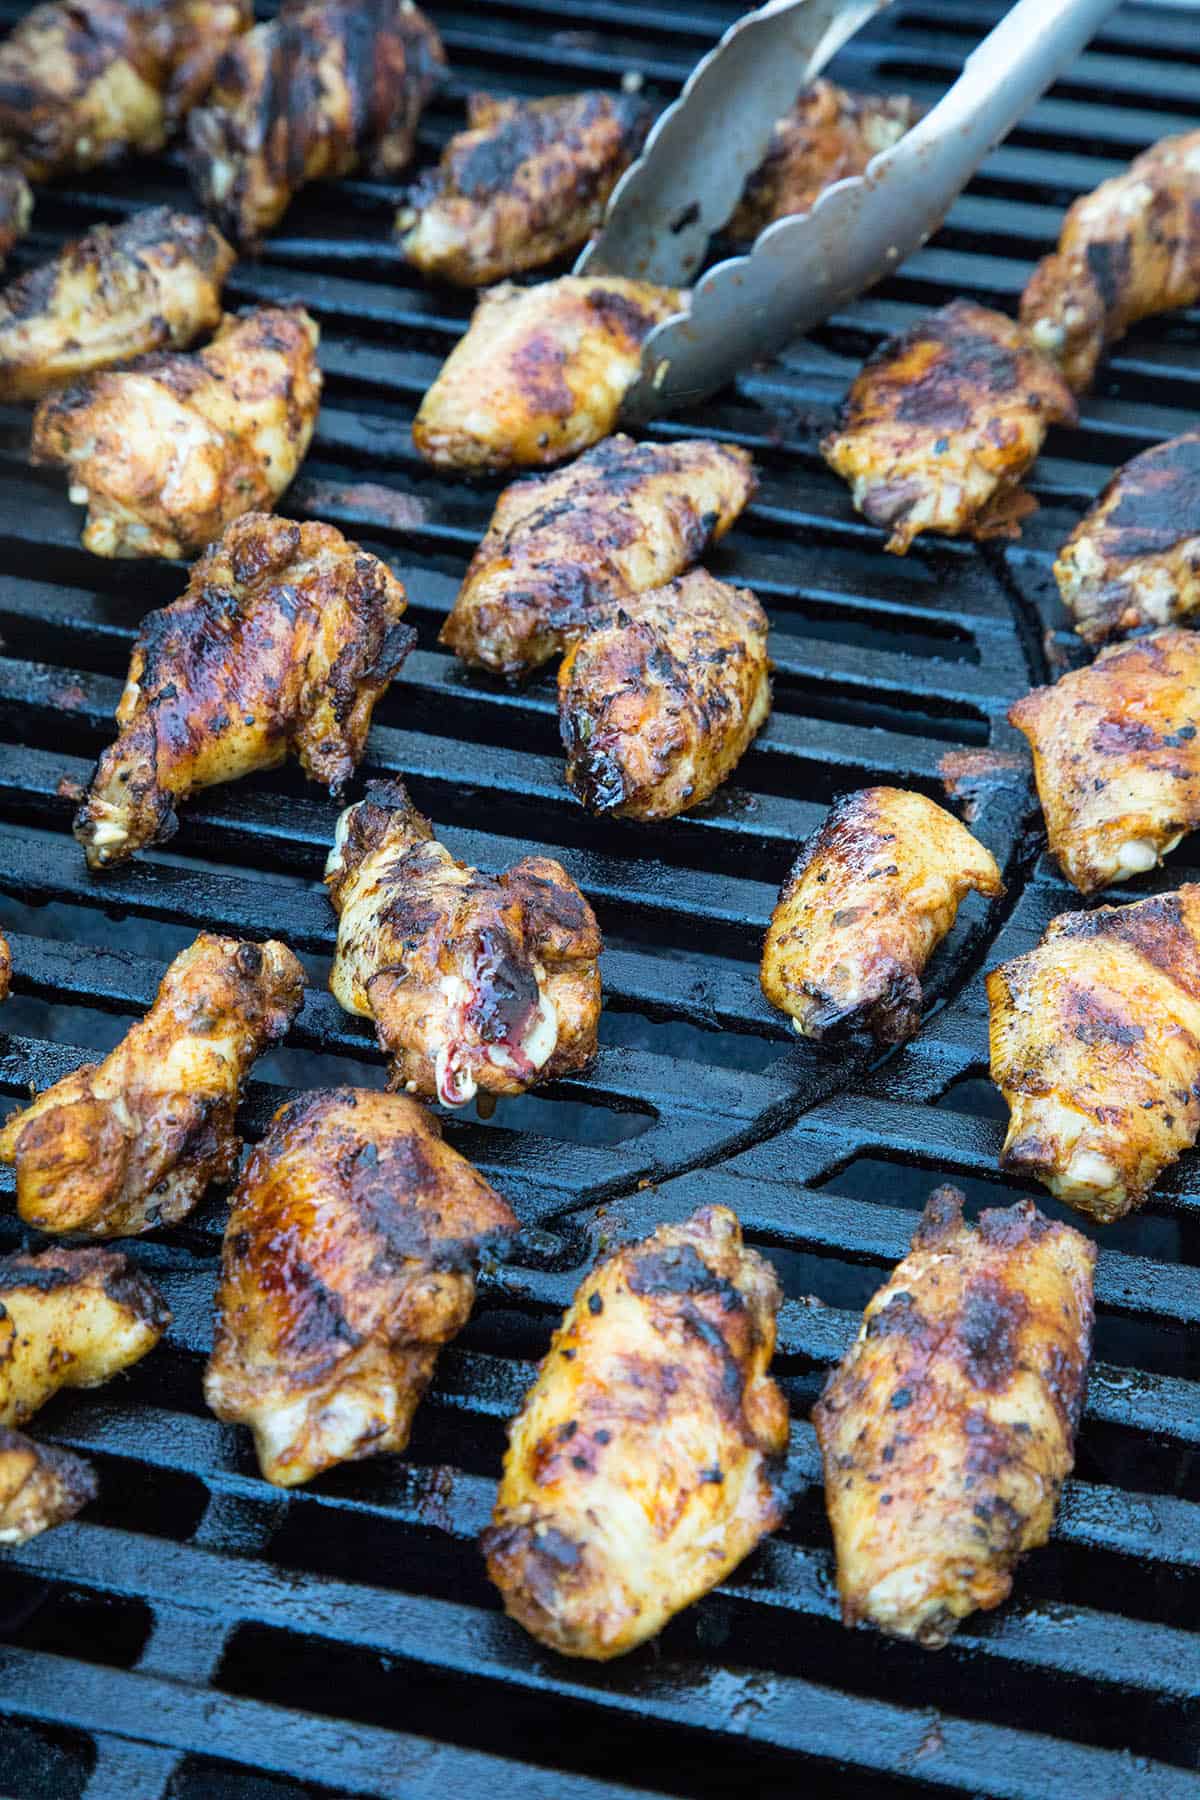 Grilling up the chicken wings